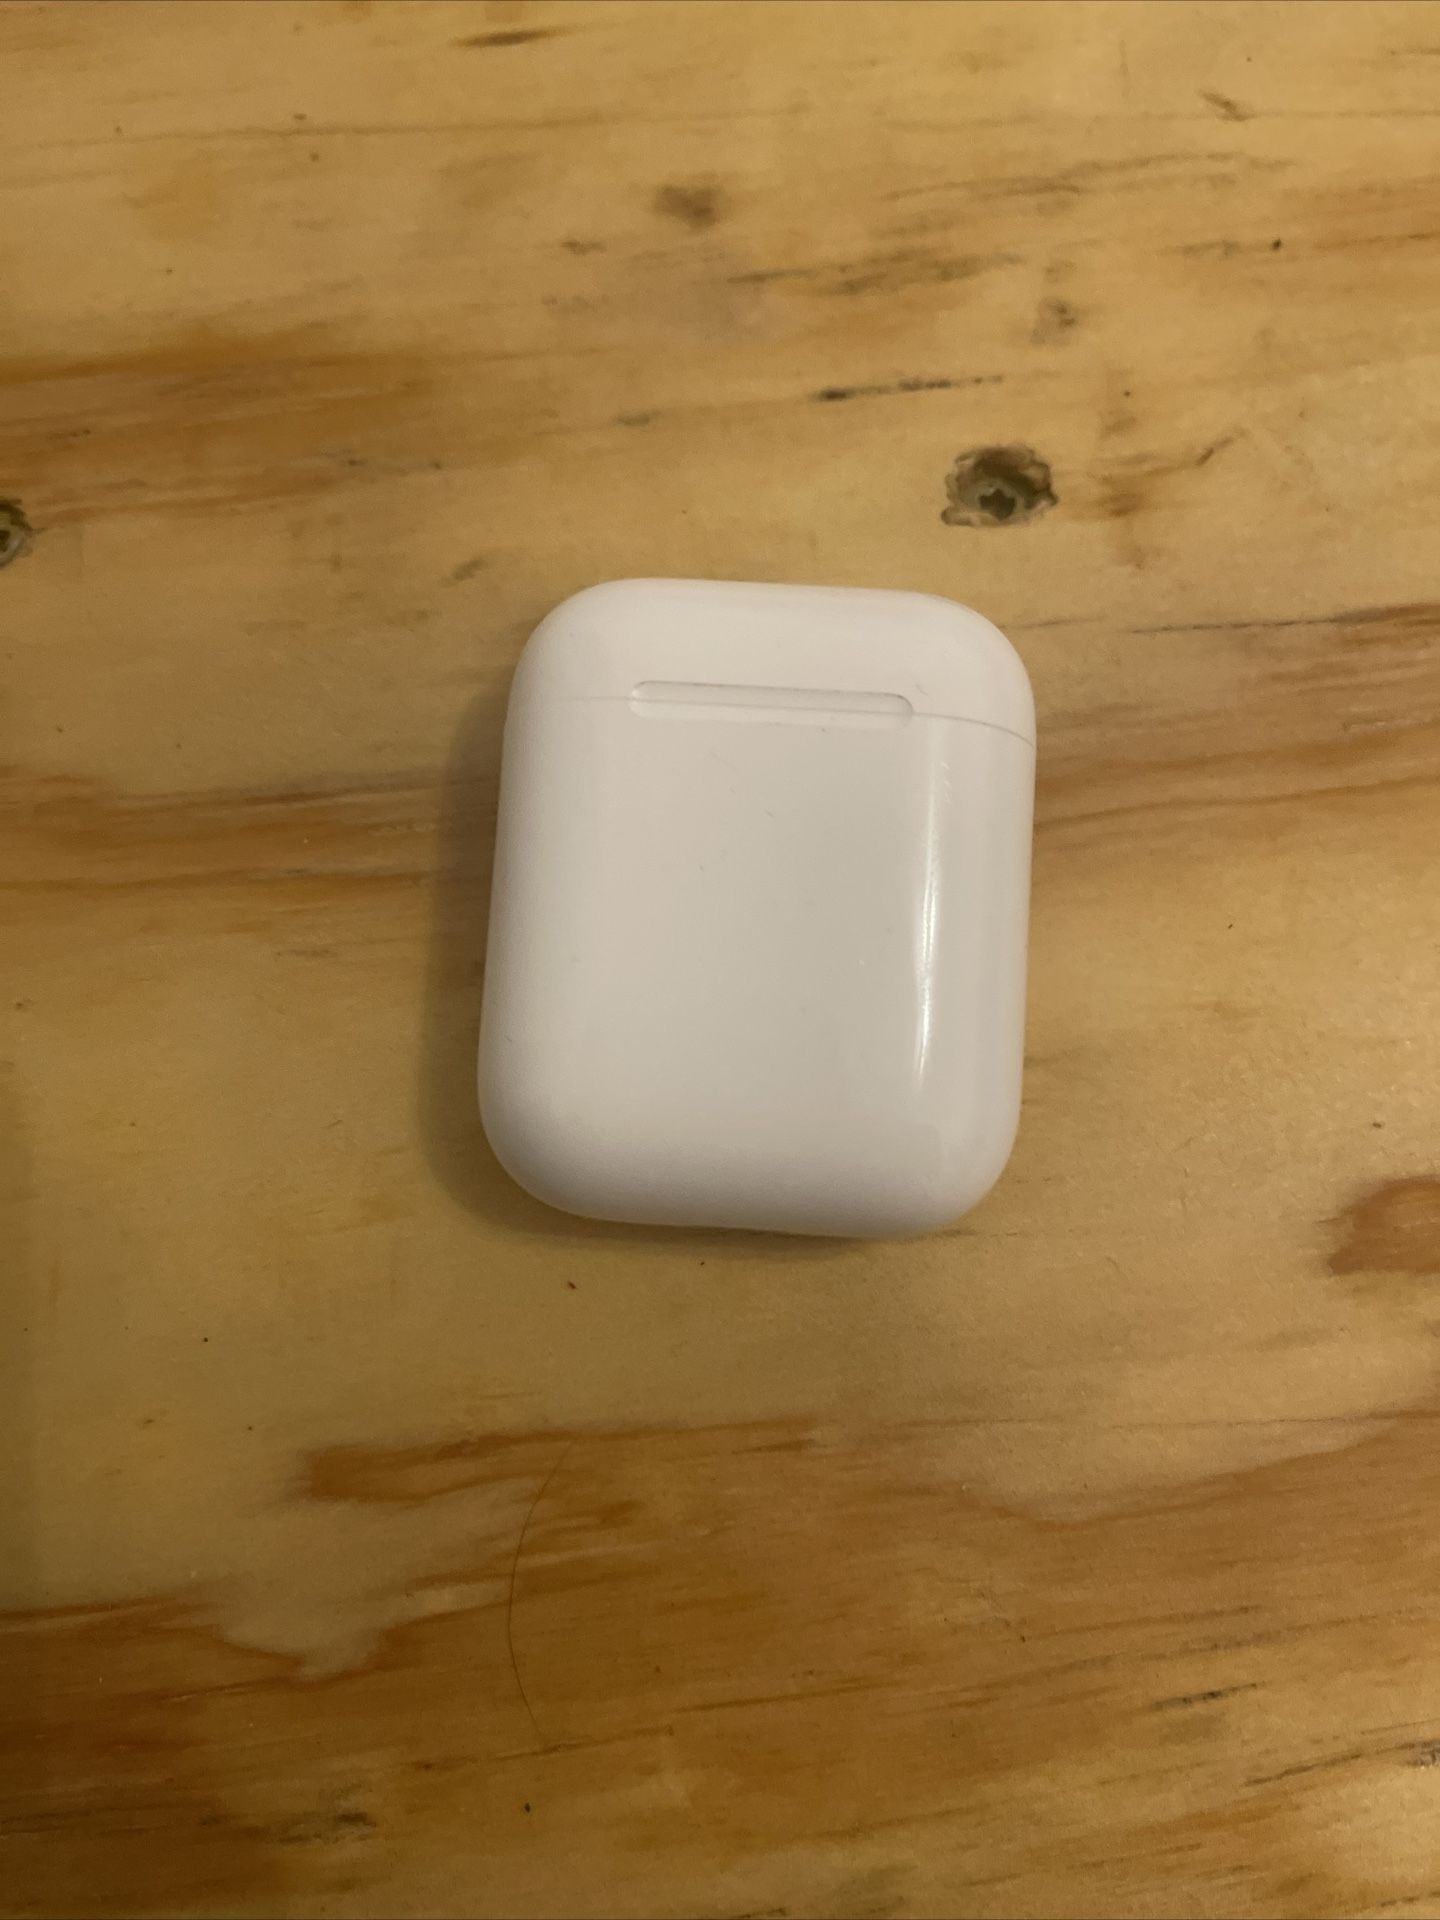 Apple Airpods A3031 (2nd Generation)